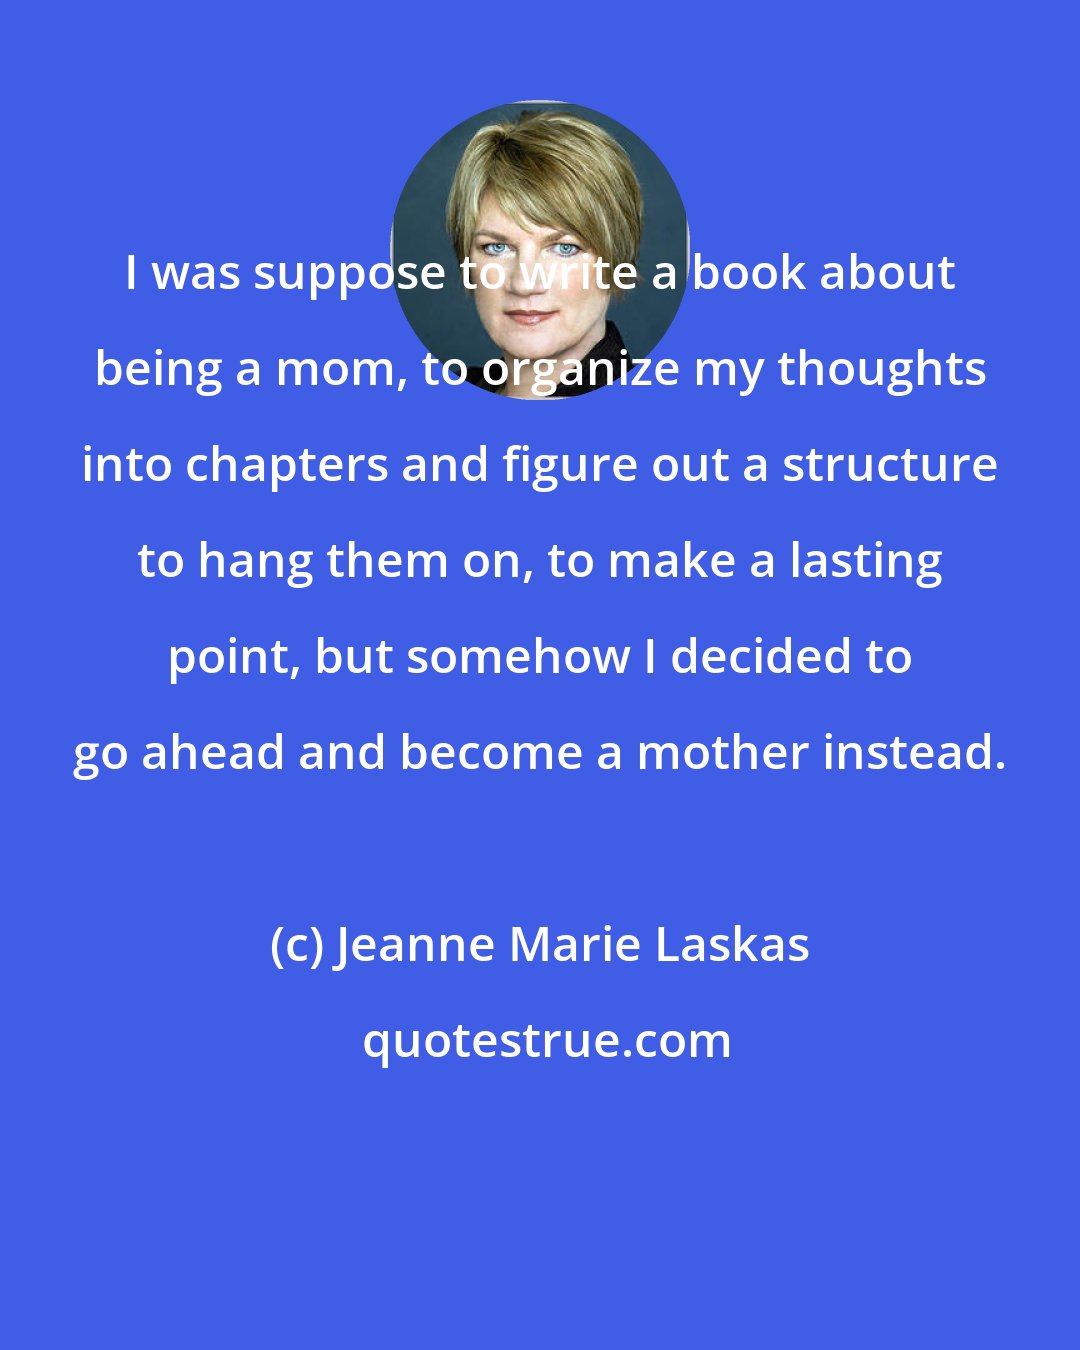 Jeanne Marie Laskas: I was suppose to write a book about being a mom, to organize my thoughts into chapters and figure out a structure to hang them on, to make a lasting point, but somehow I decided to go ahead and become a mother instead.